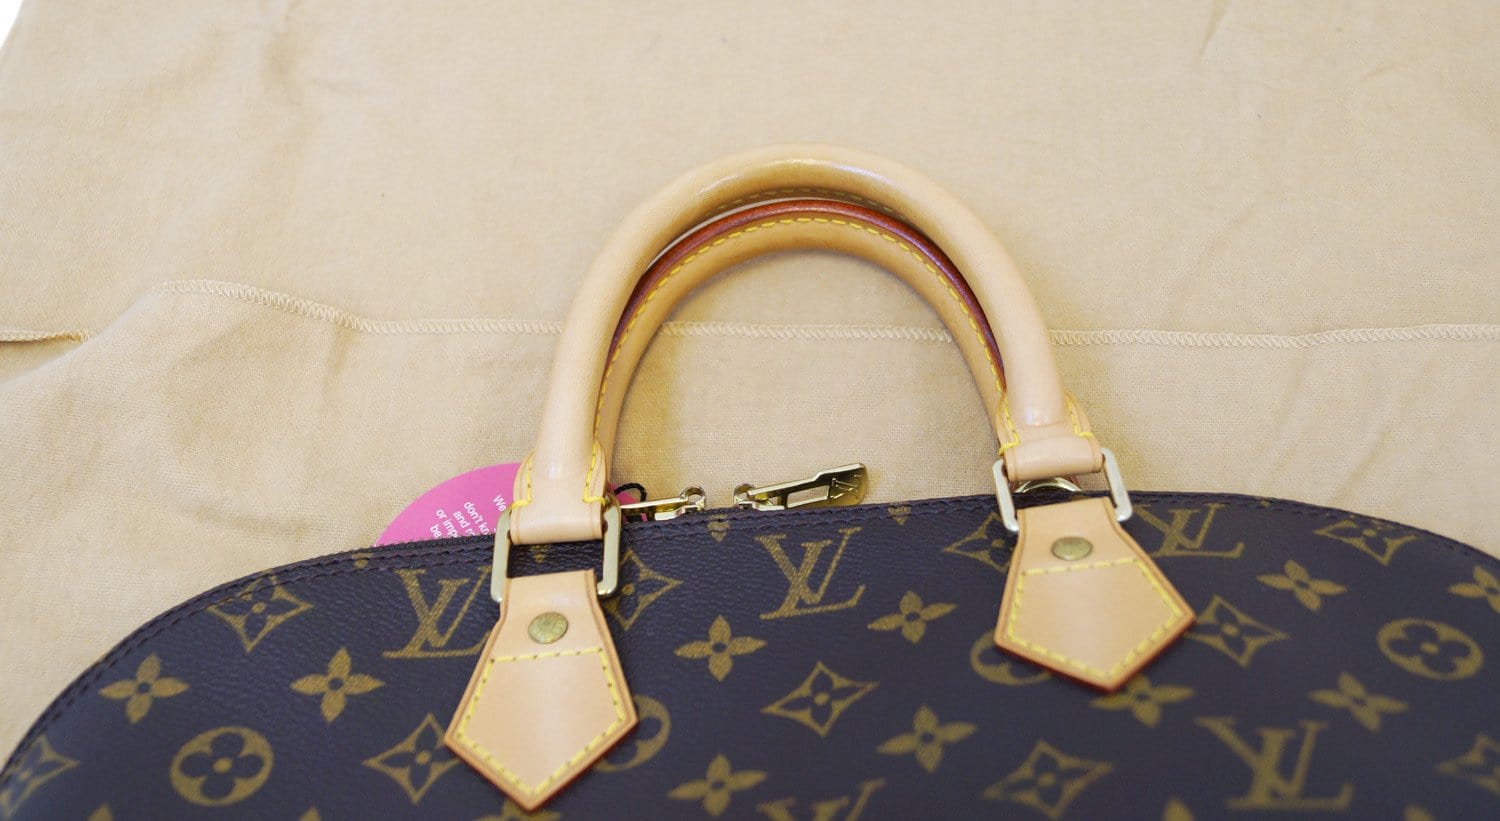 Customized Louis Vuitton Alma Picsou loves Money in brown monogram  canvas! For Sale at 1stDibs